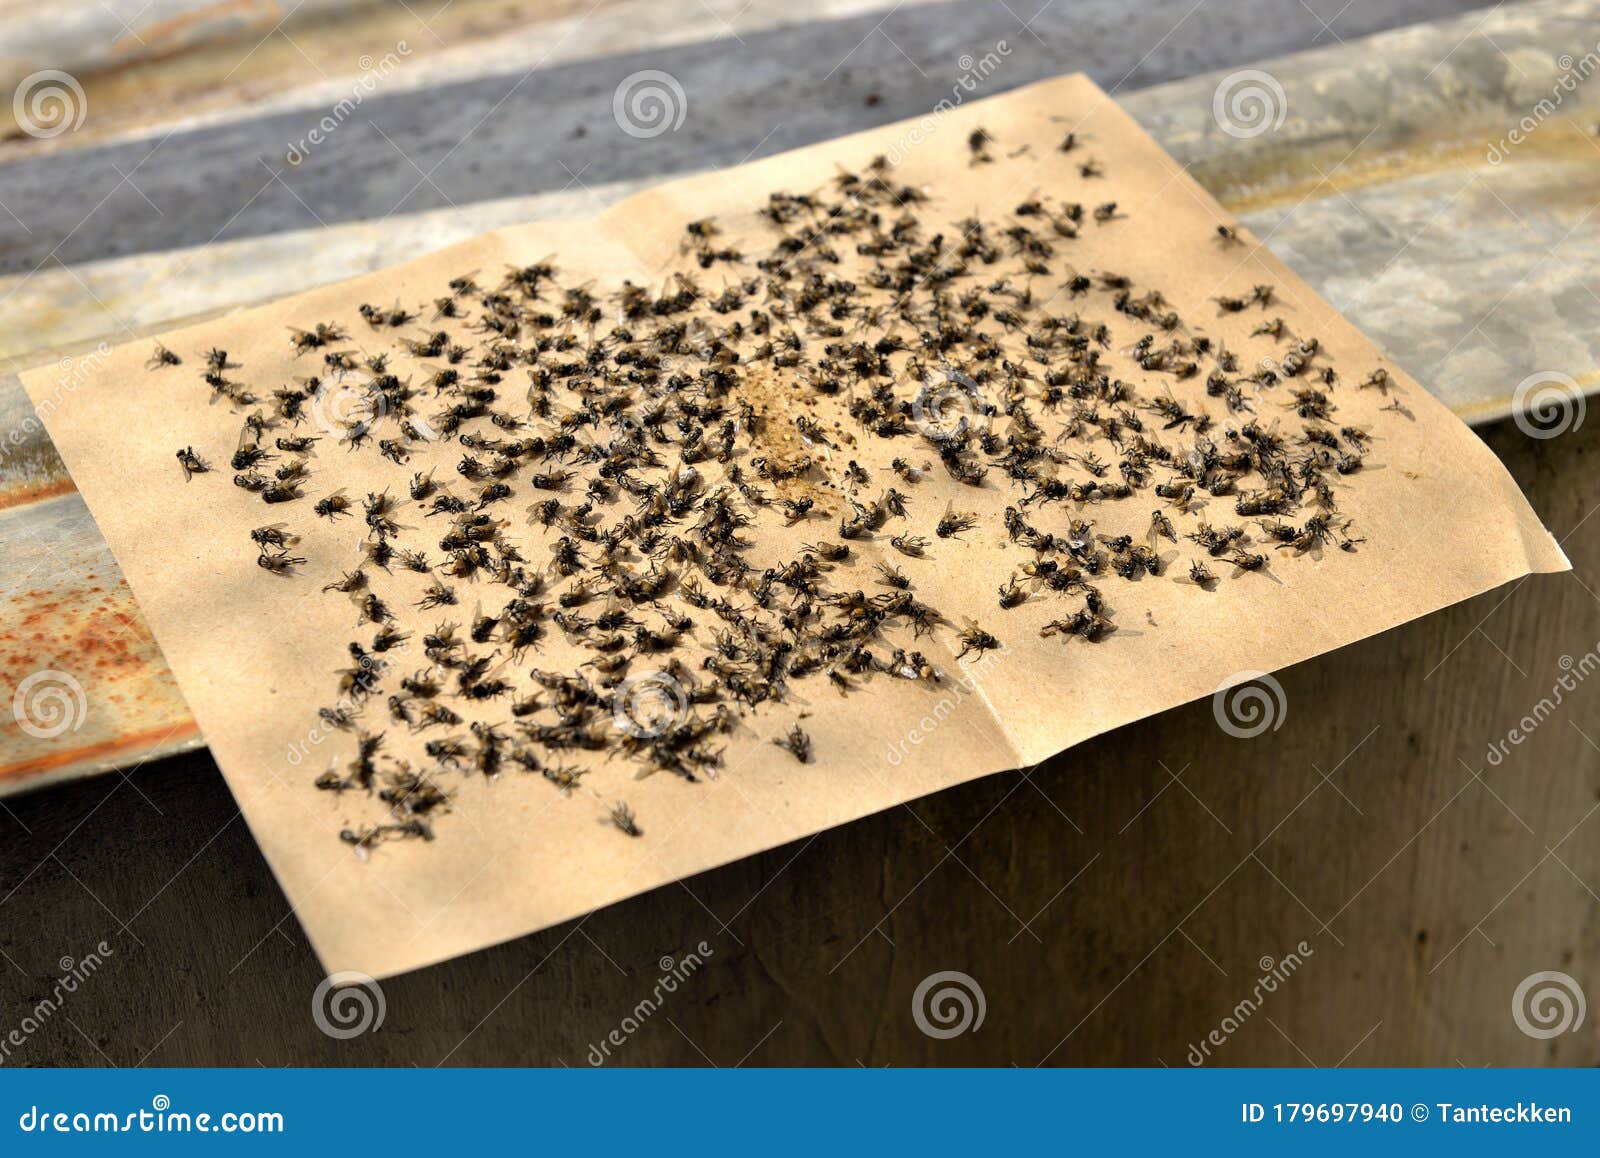 Flies Caught on Sticky Fly Paper Traps. Stock Photo - Image of